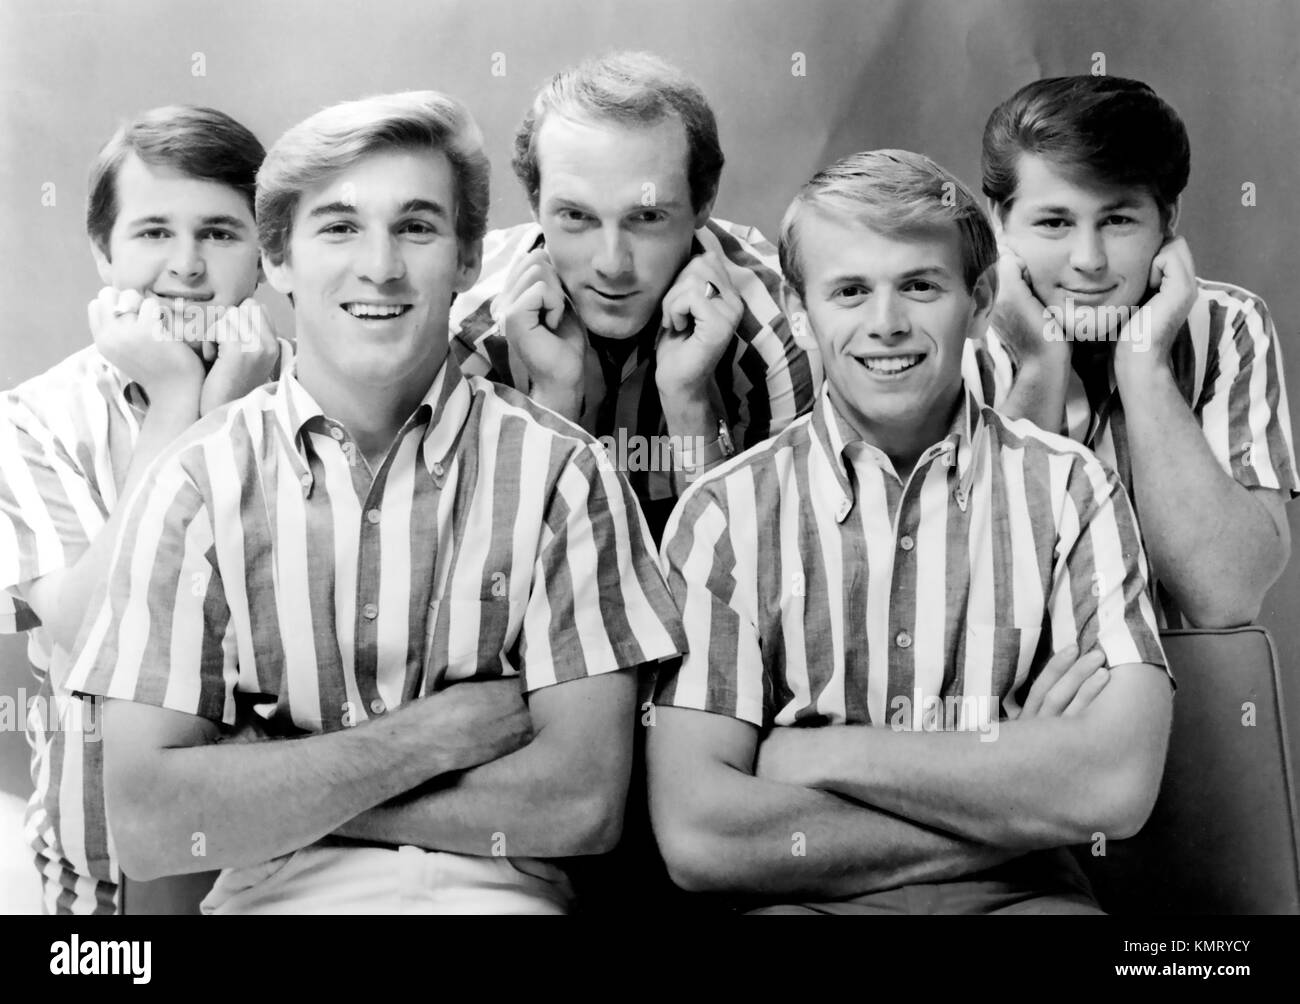 BEACH BOYS  Promotional photo of  US music group about 1964. From left: Carl Wilson, Dennis Wilson, Mike Love, Al Jardine, Brian Wilson. Stock Photo